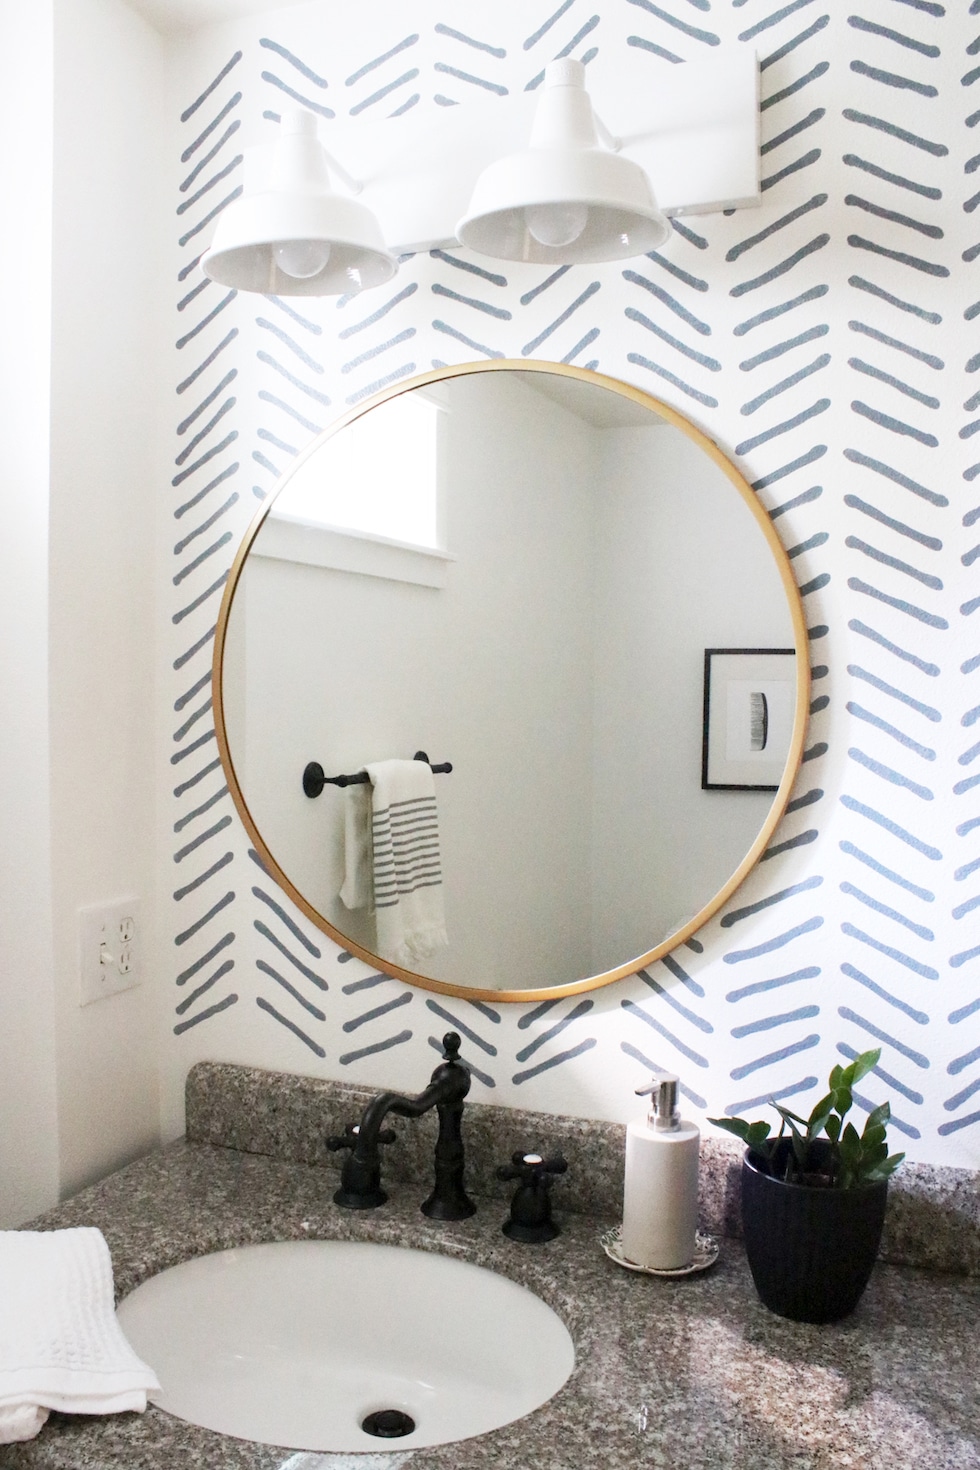 Our Bathroom Makeover: Painted Vanity and Wall Stencil Details